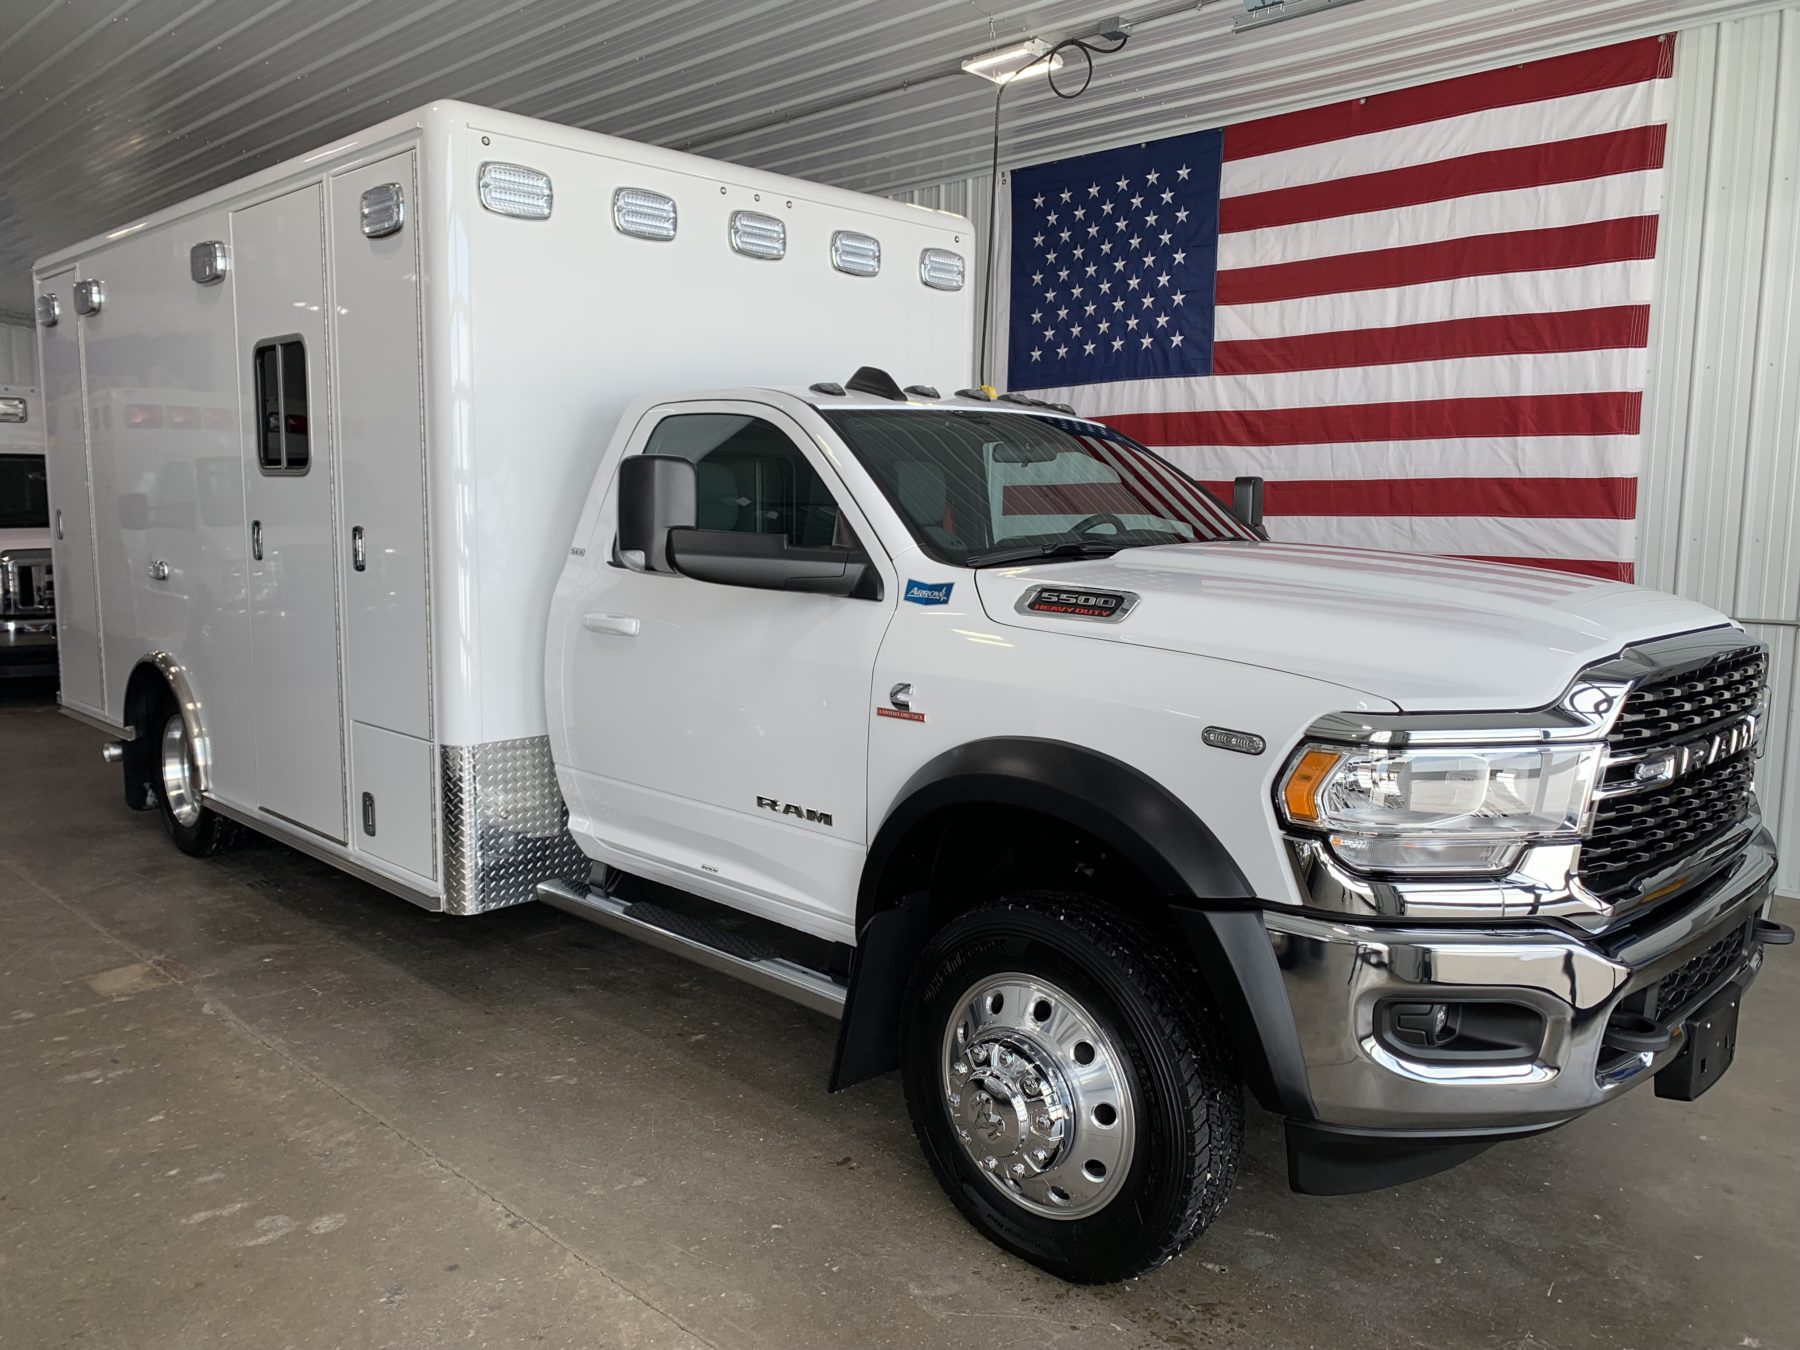 2022 Ram 5500 4x4 Heavy Duty Ambulance For Sale – Picture 1